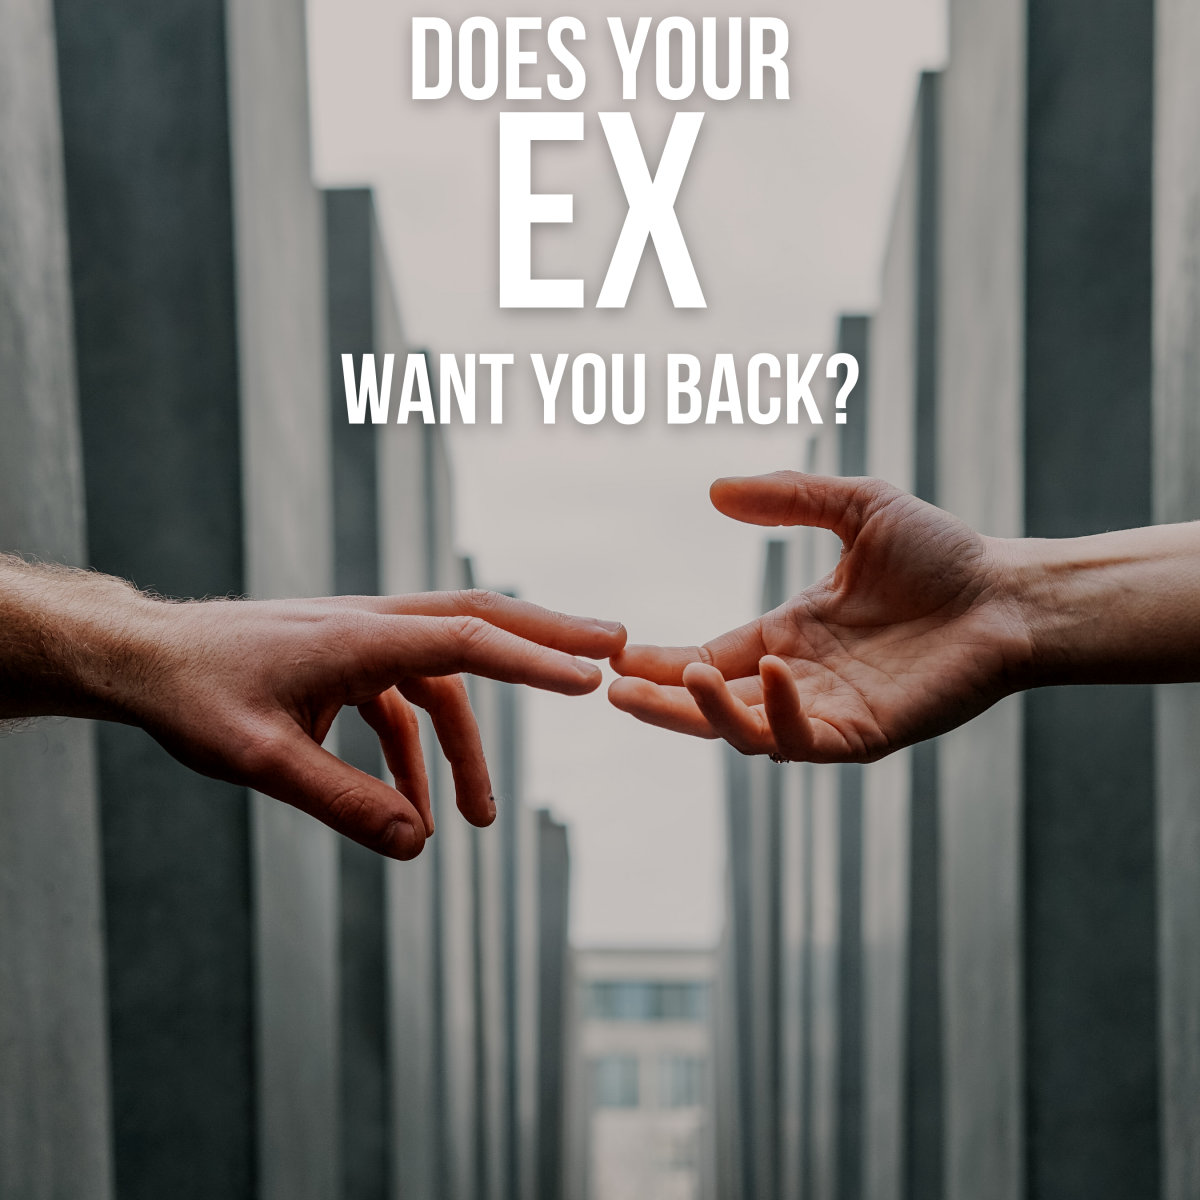 13 Signs Your Ex Wants You Back